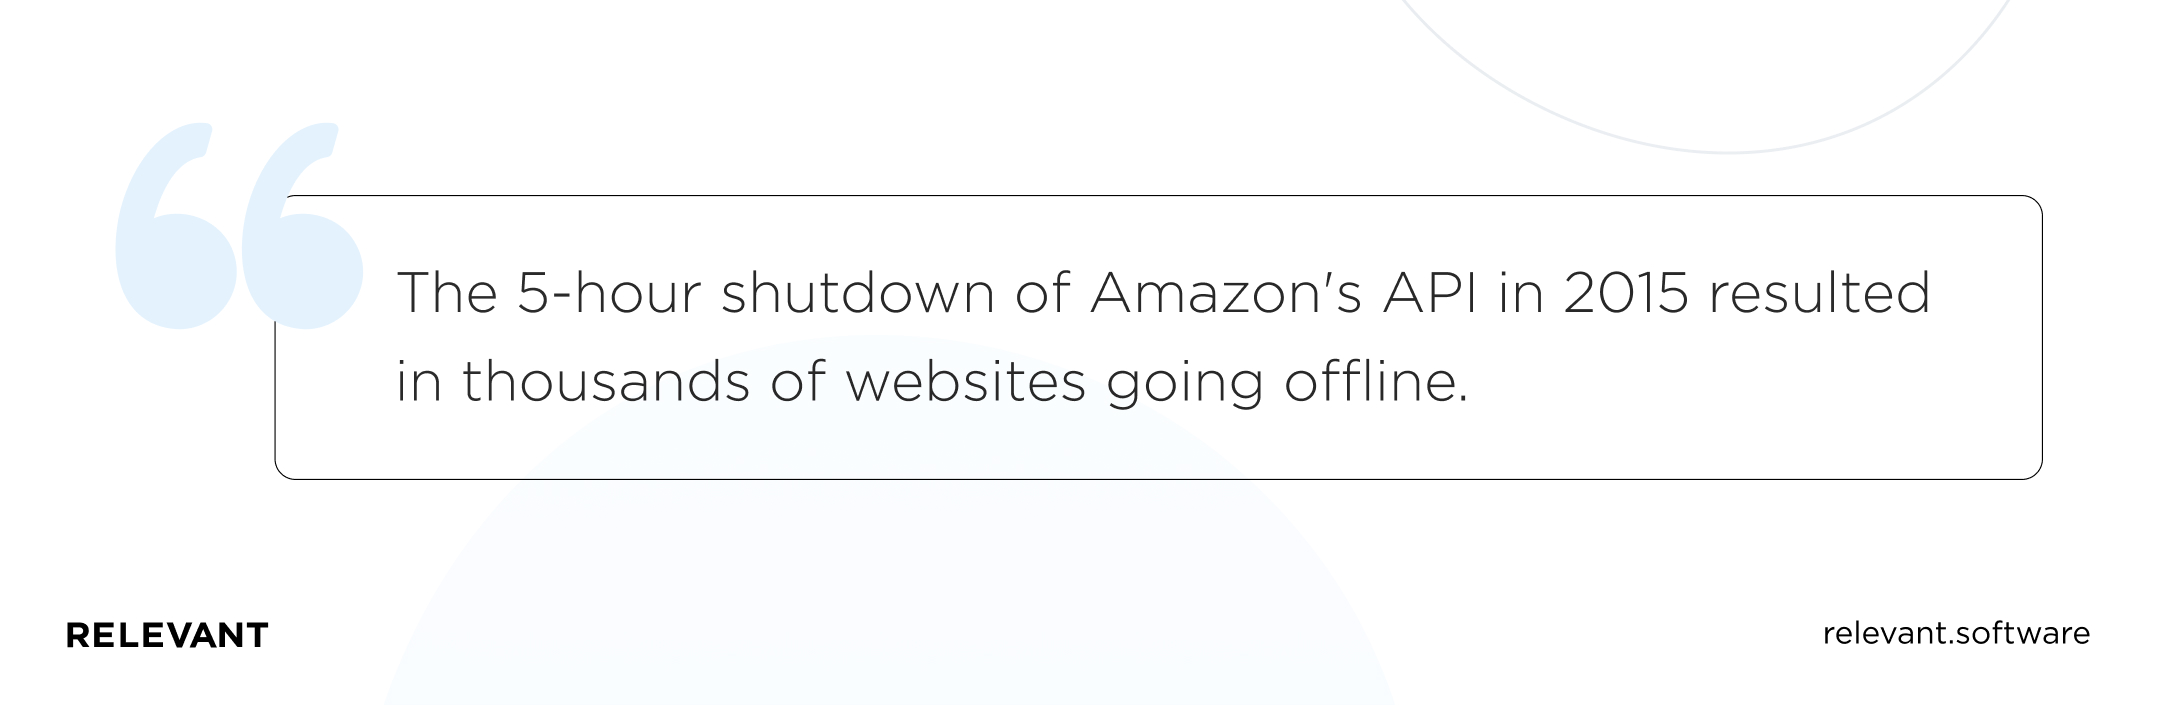 The 5-hour shutdown of Amazon's API in 2015 resulted in thousands of websites going offline.